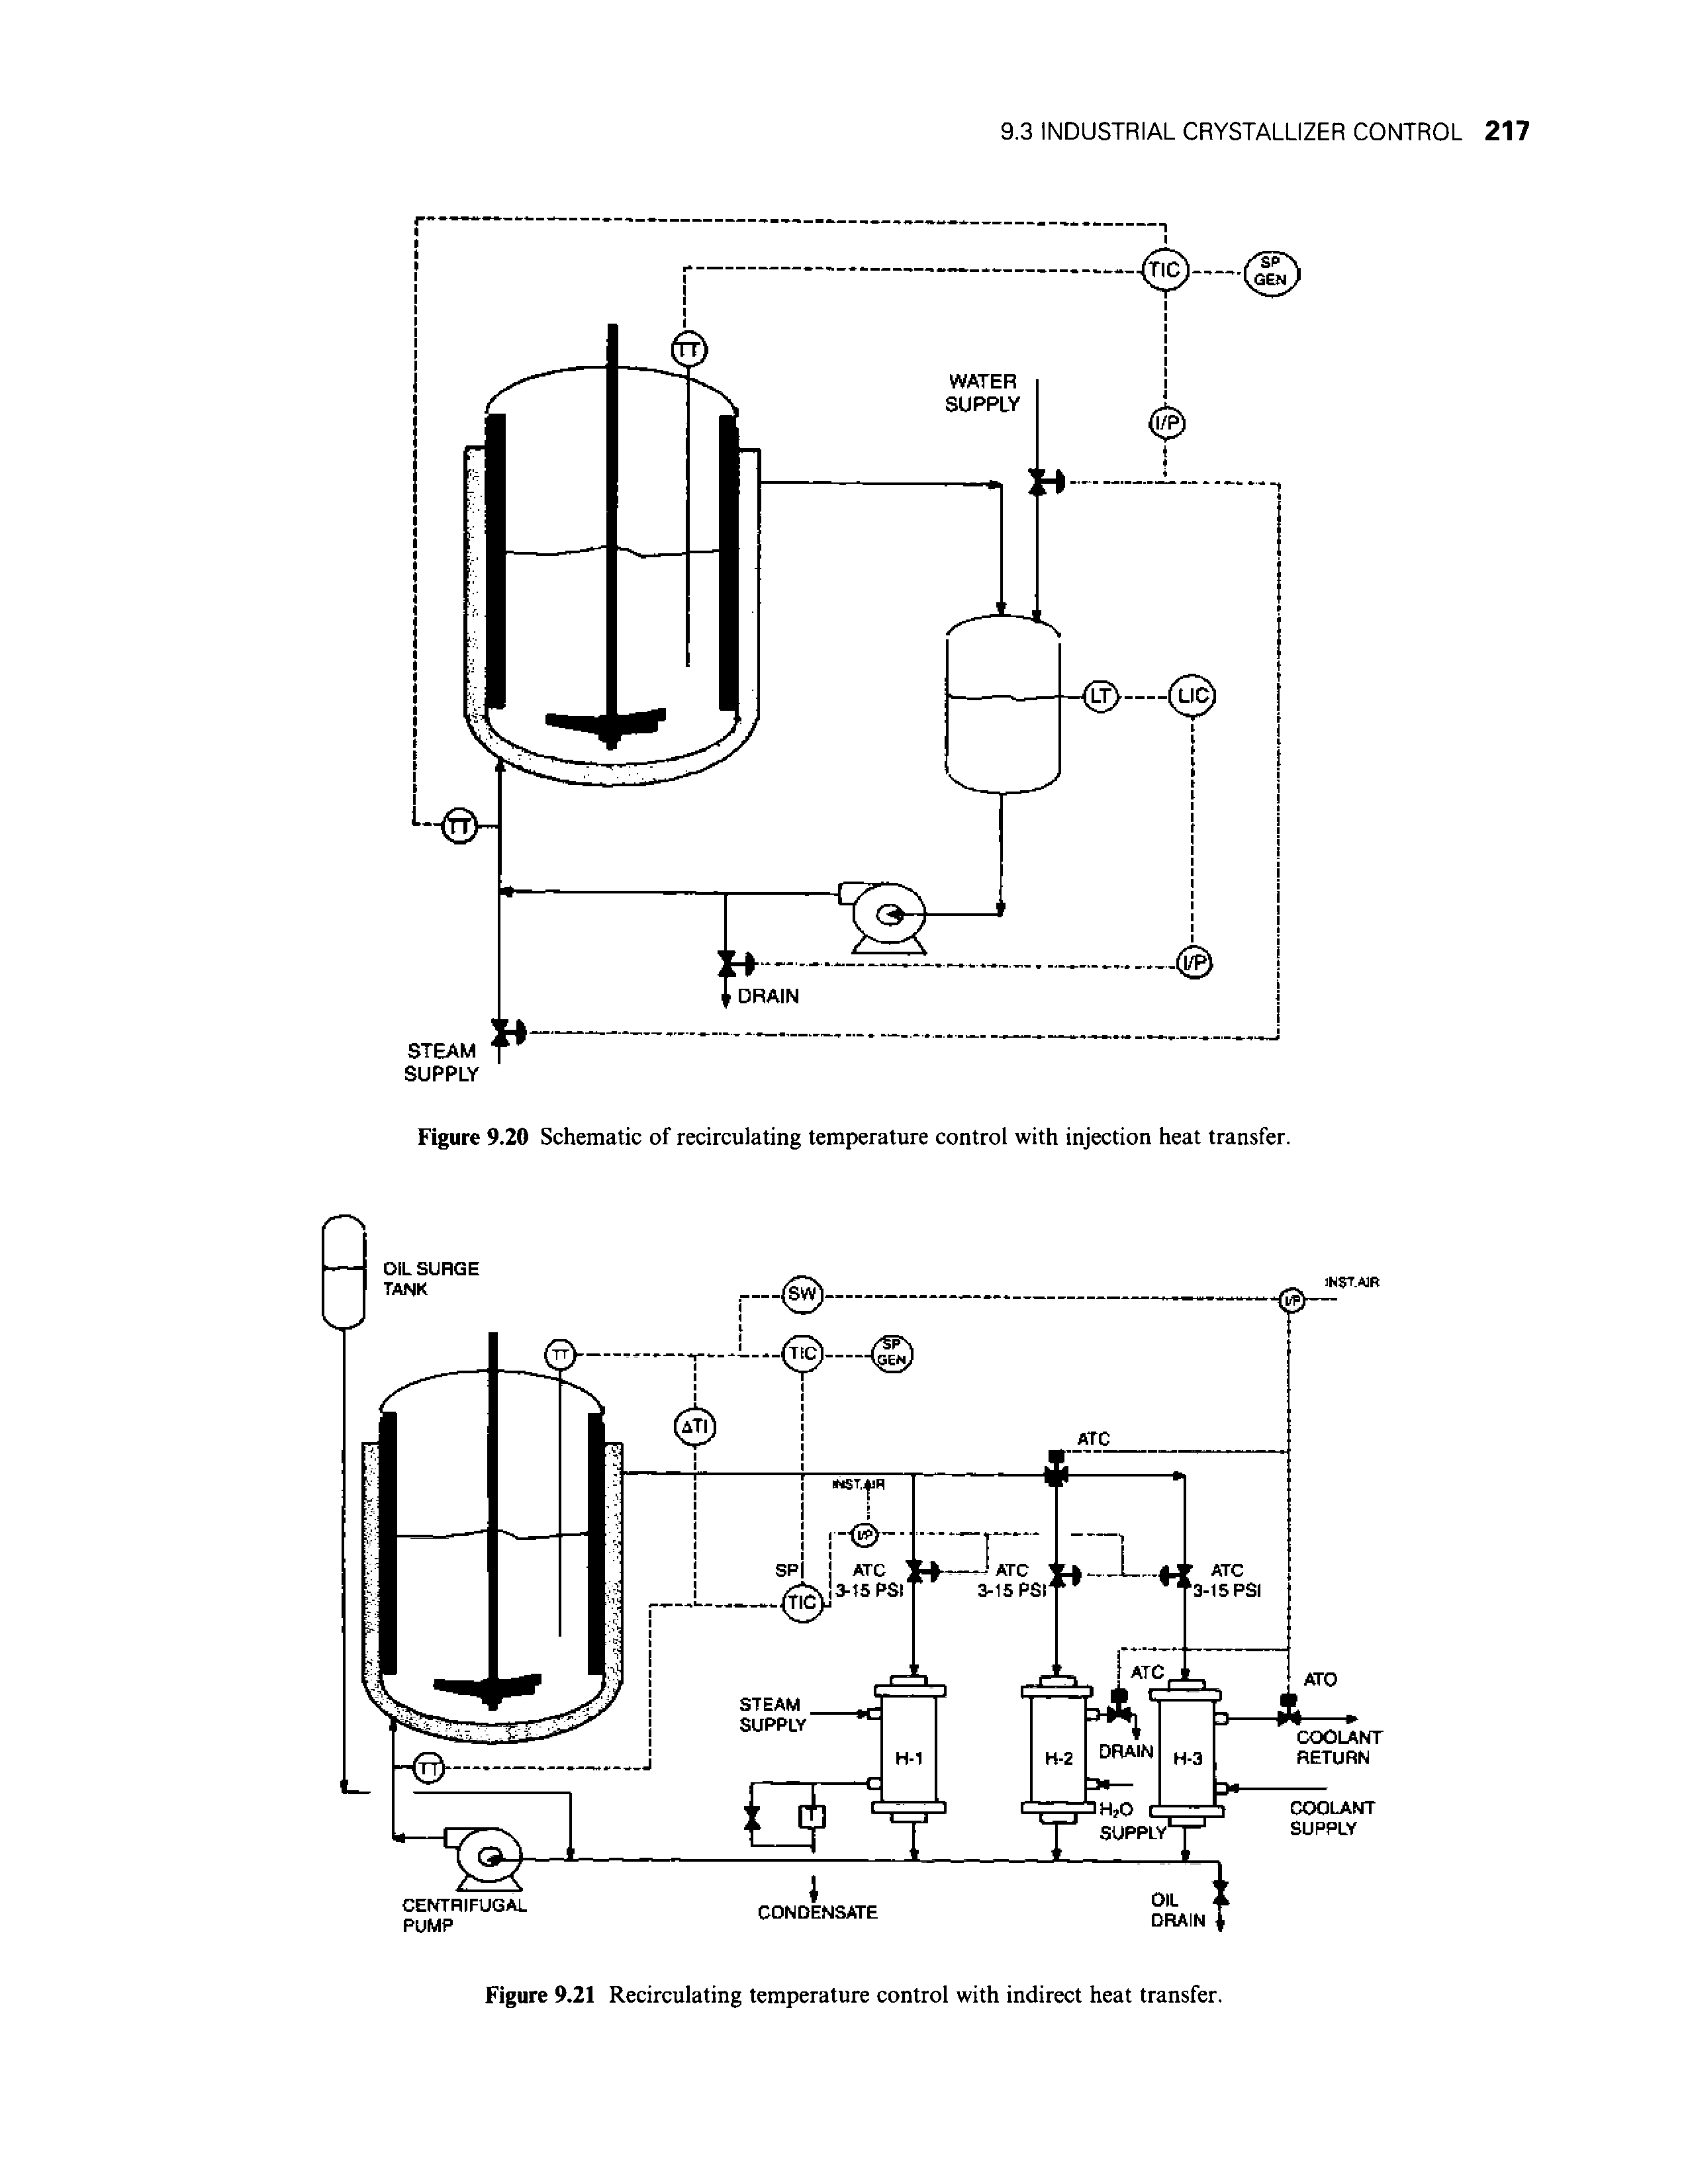 Figure 9.20 Schematic of recirculating temperature control with injection heat transfer.